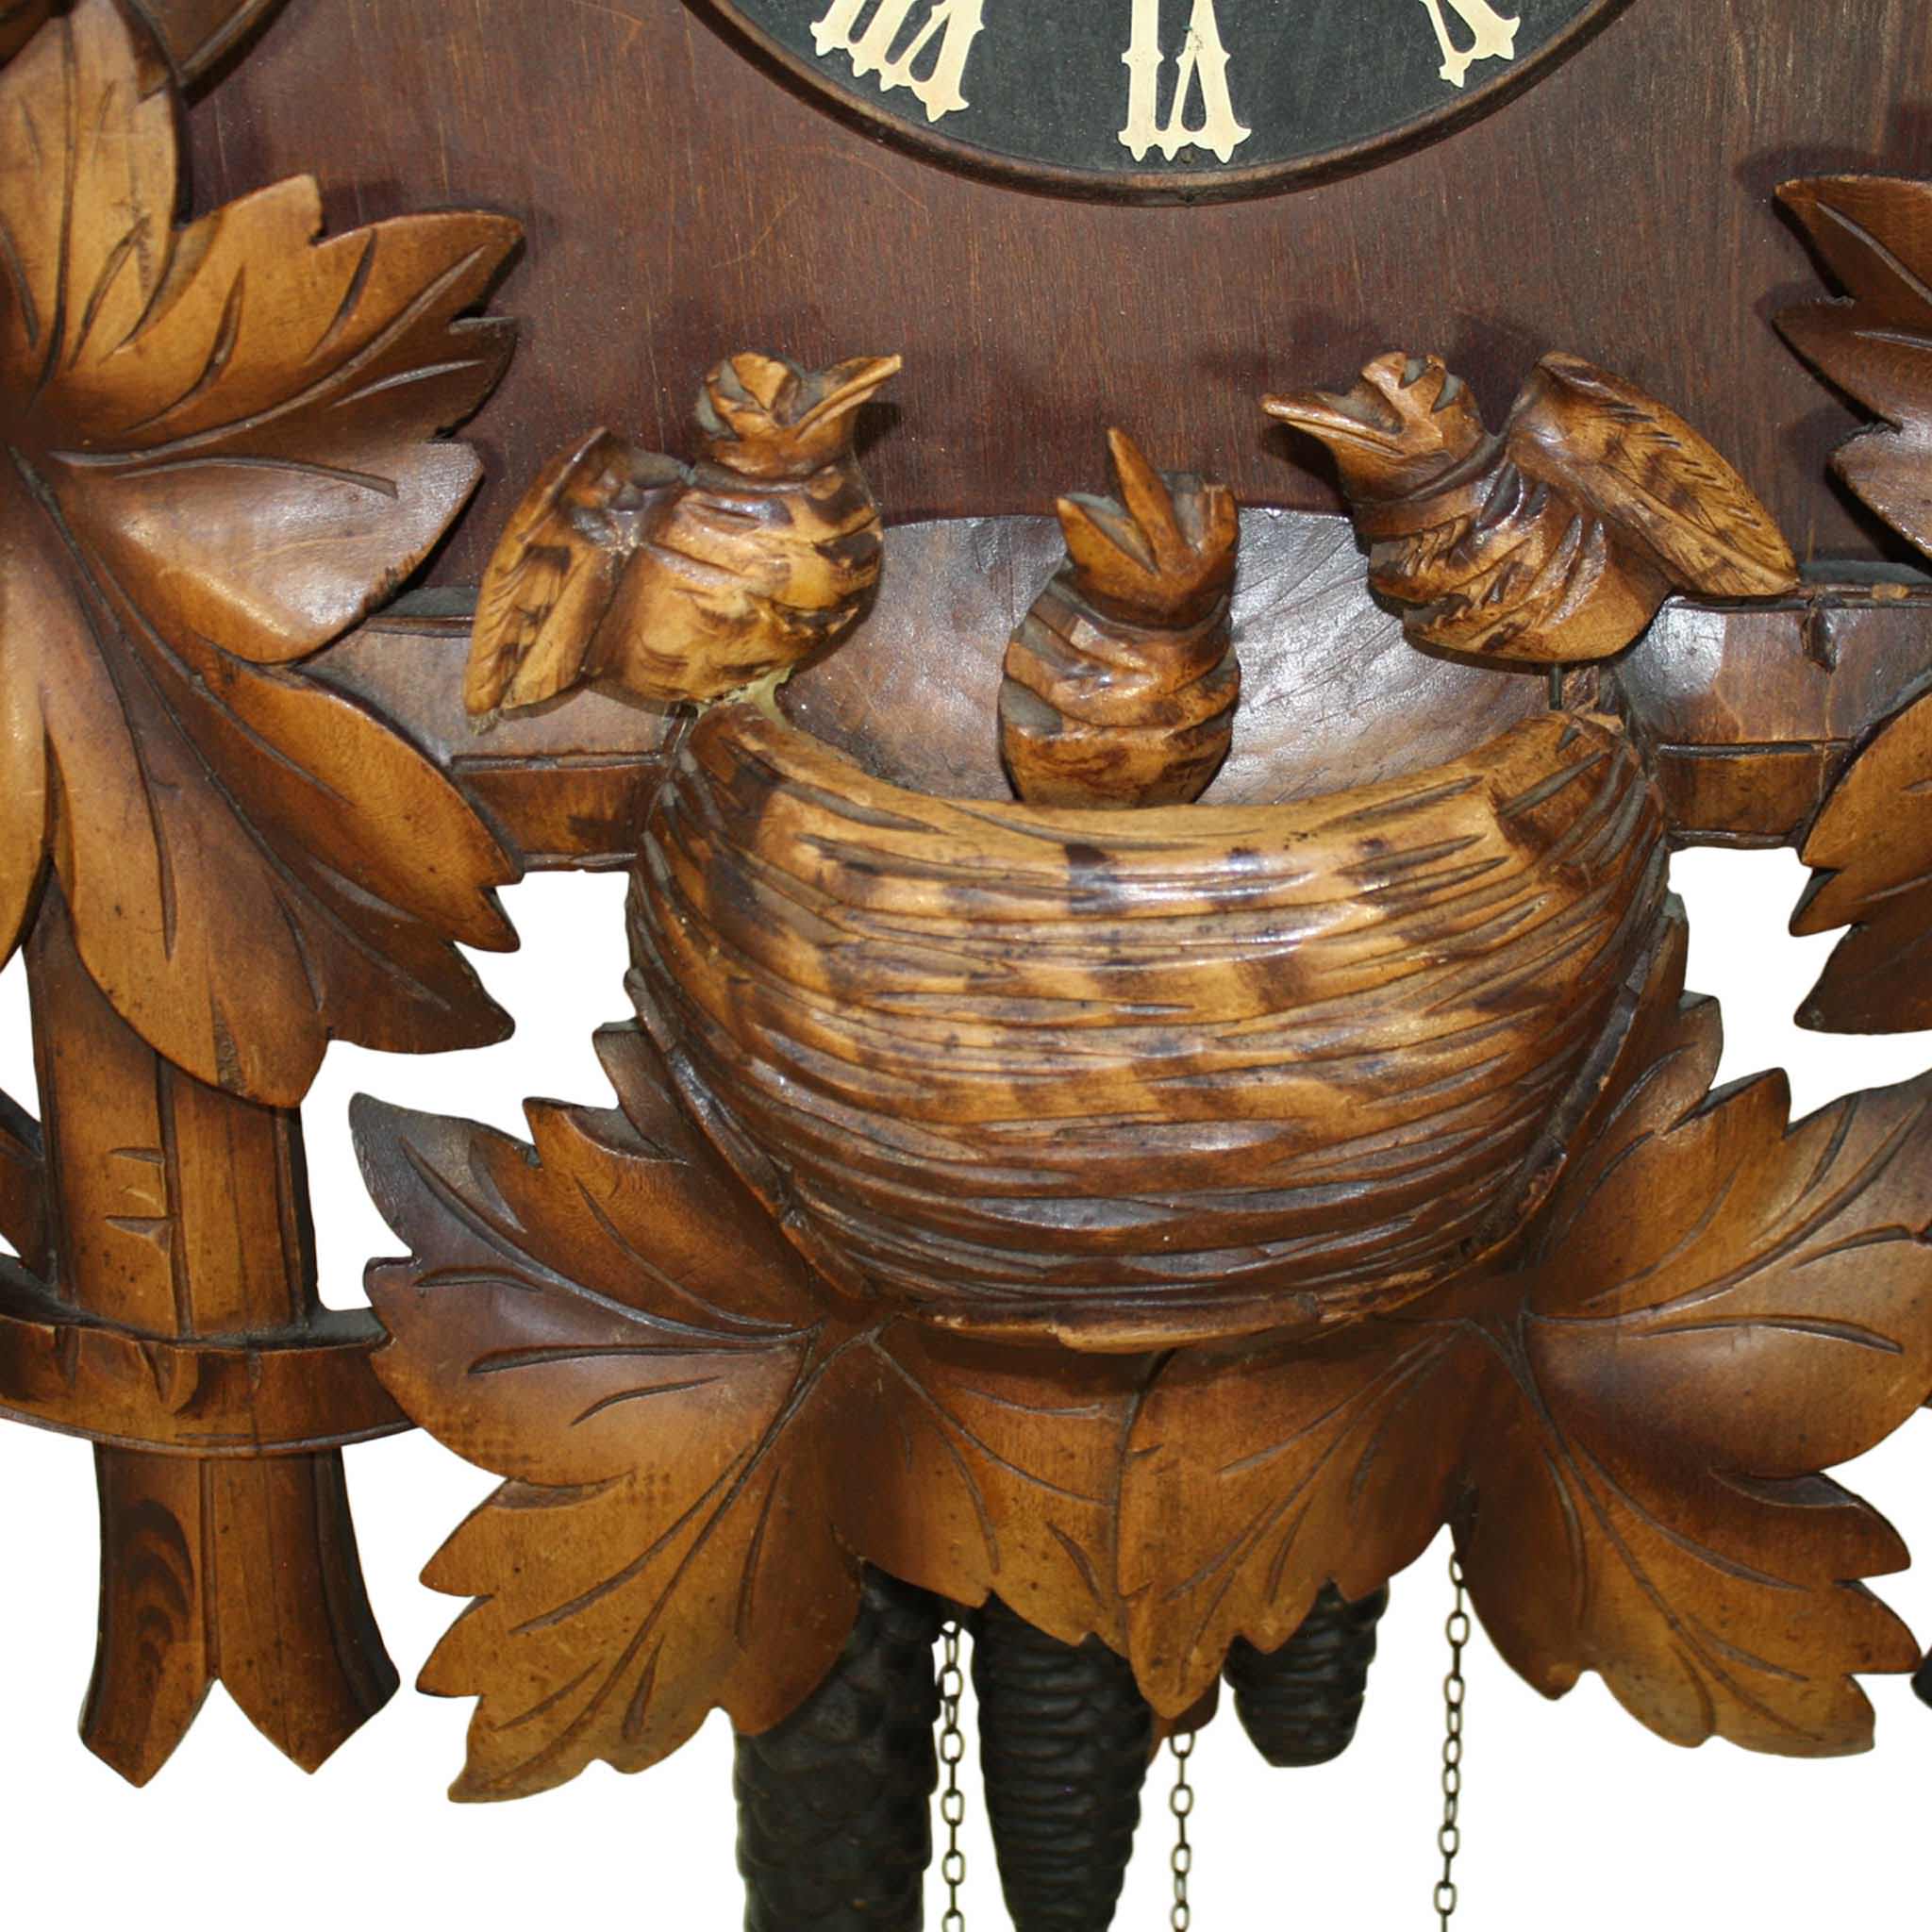 German Cuckoo Clock with Carved Eagles